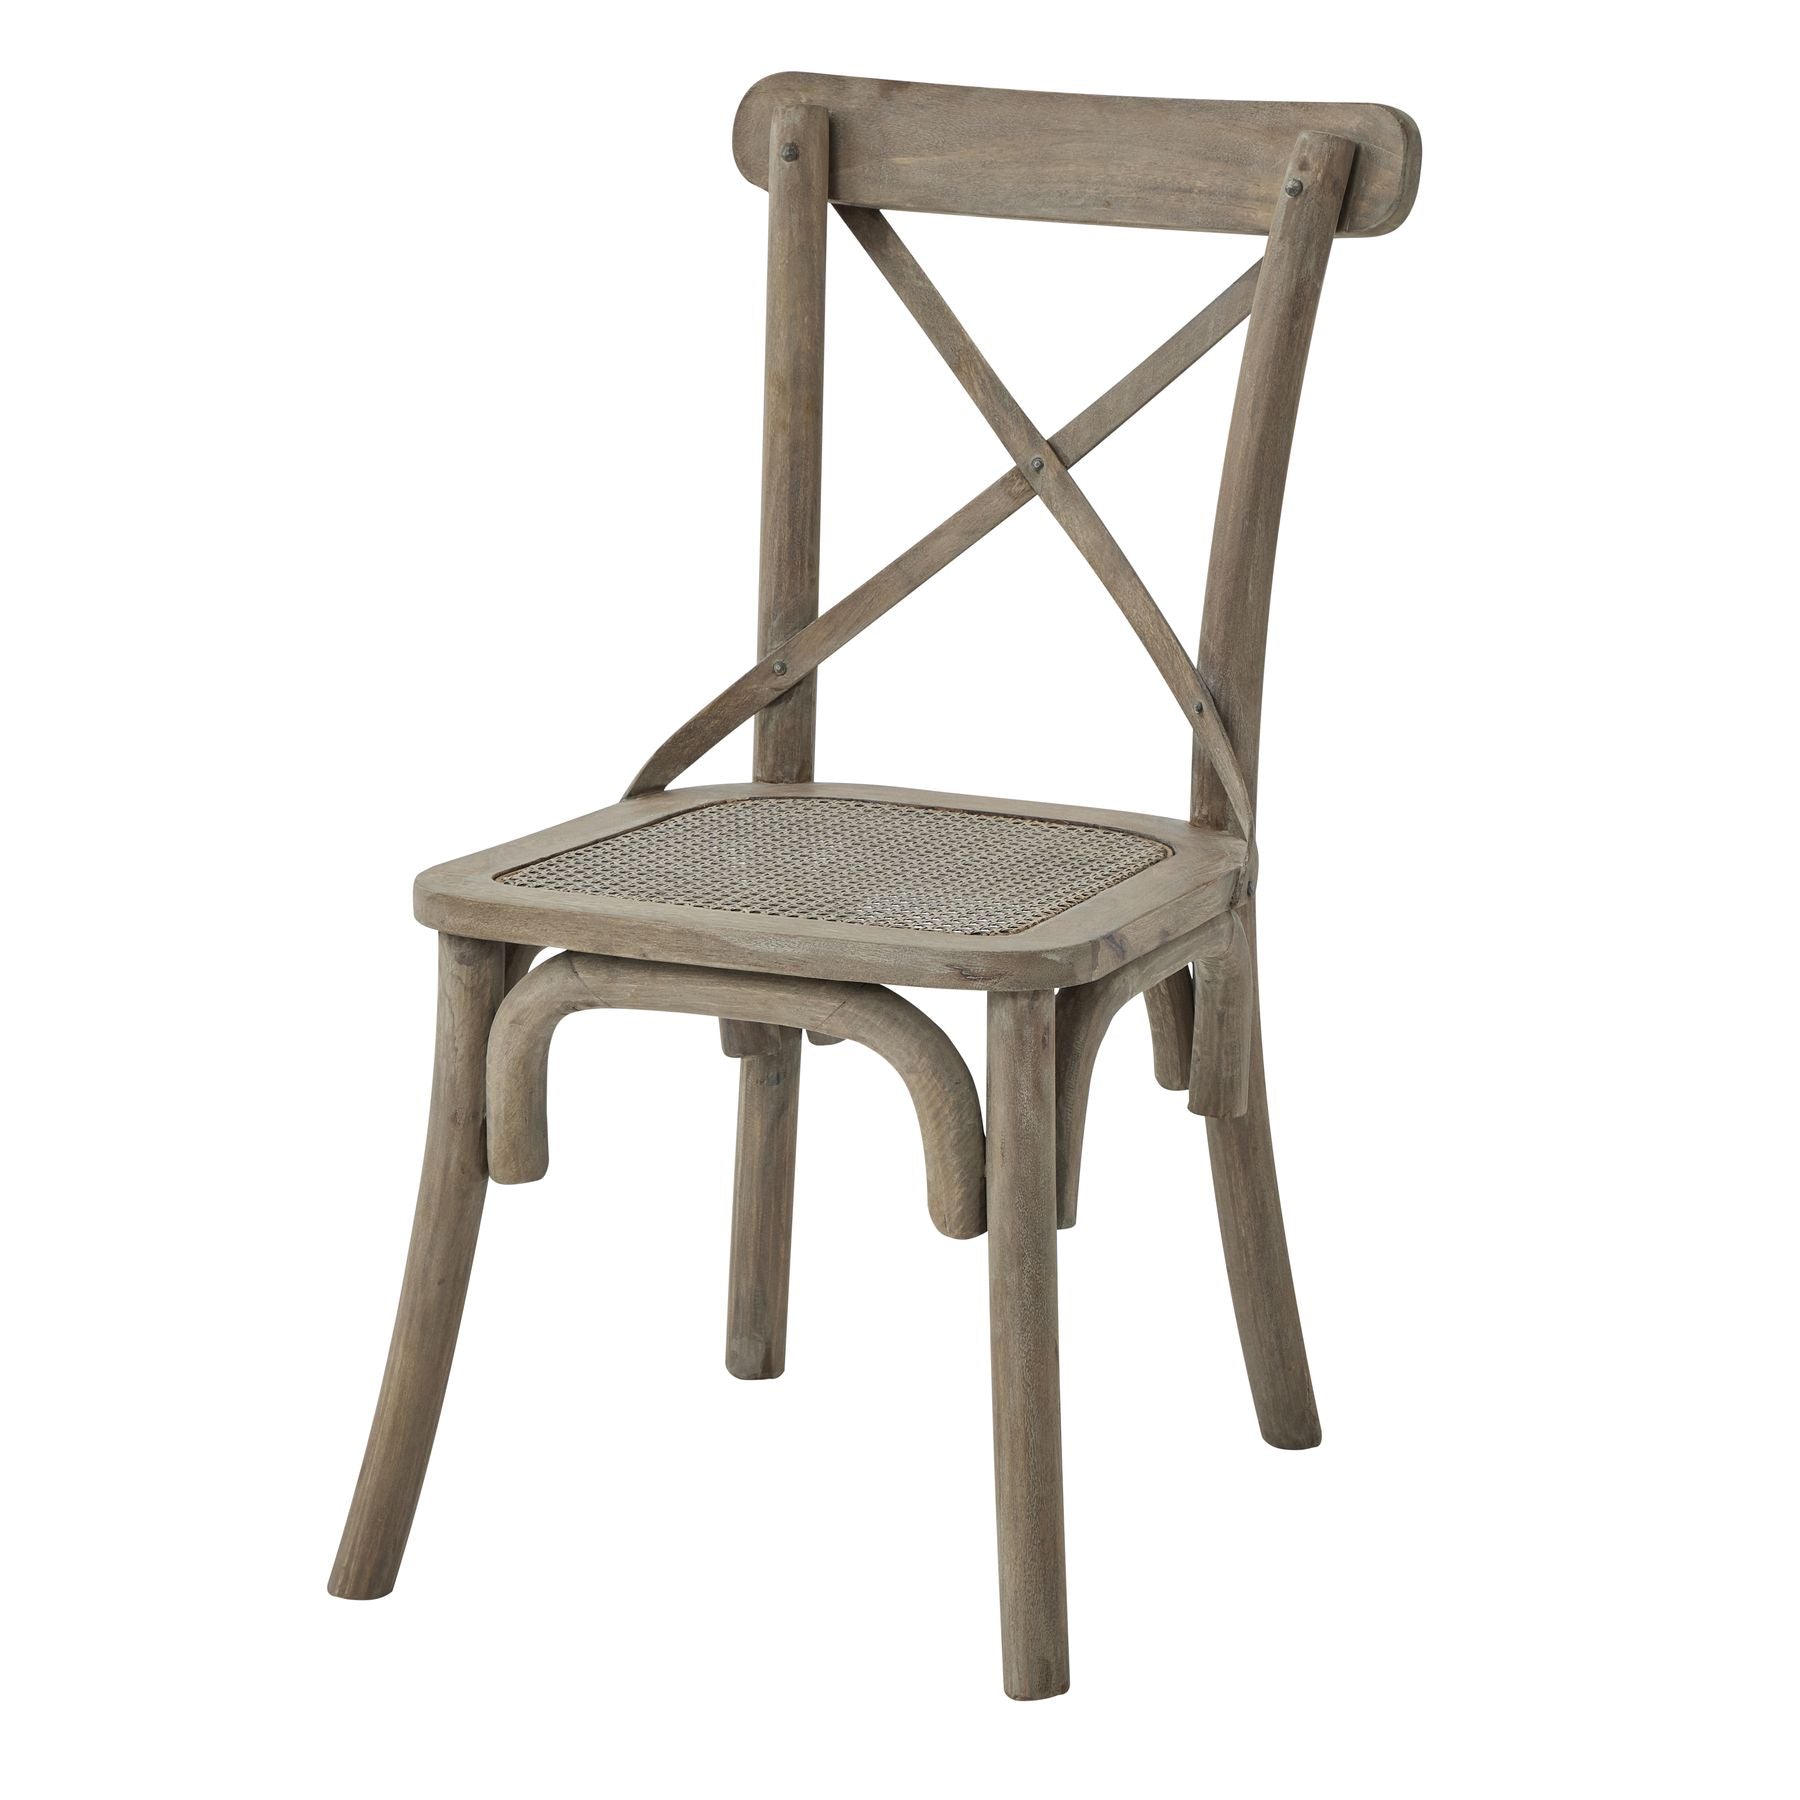 View Copgrove Collection Cross Back Chair With Rush Seat information